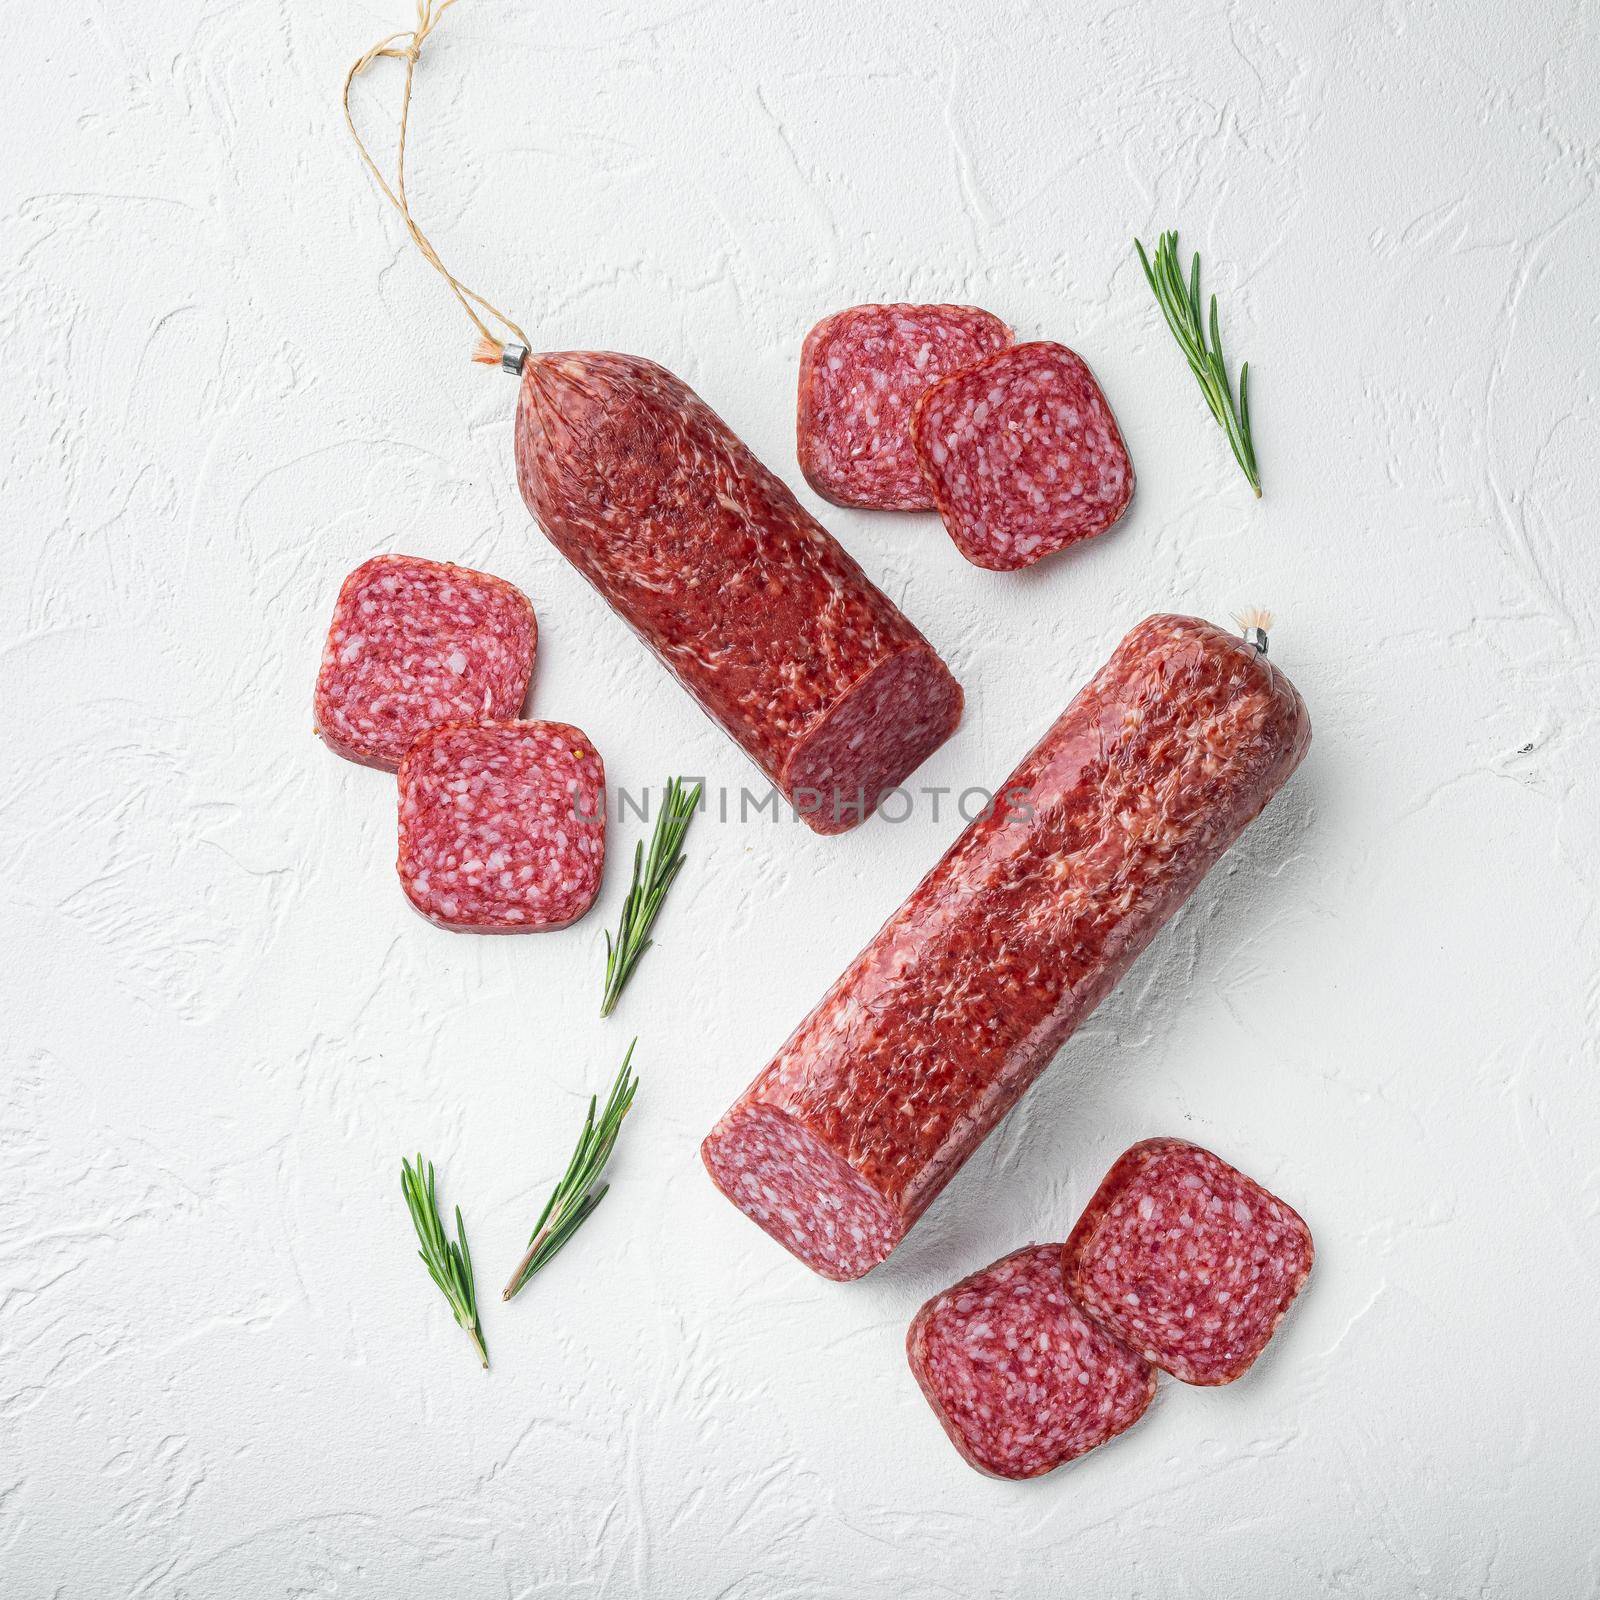 Salami with herbs , garlic , square format, on white stone table background, top view flat lay by Ilianesolenyi